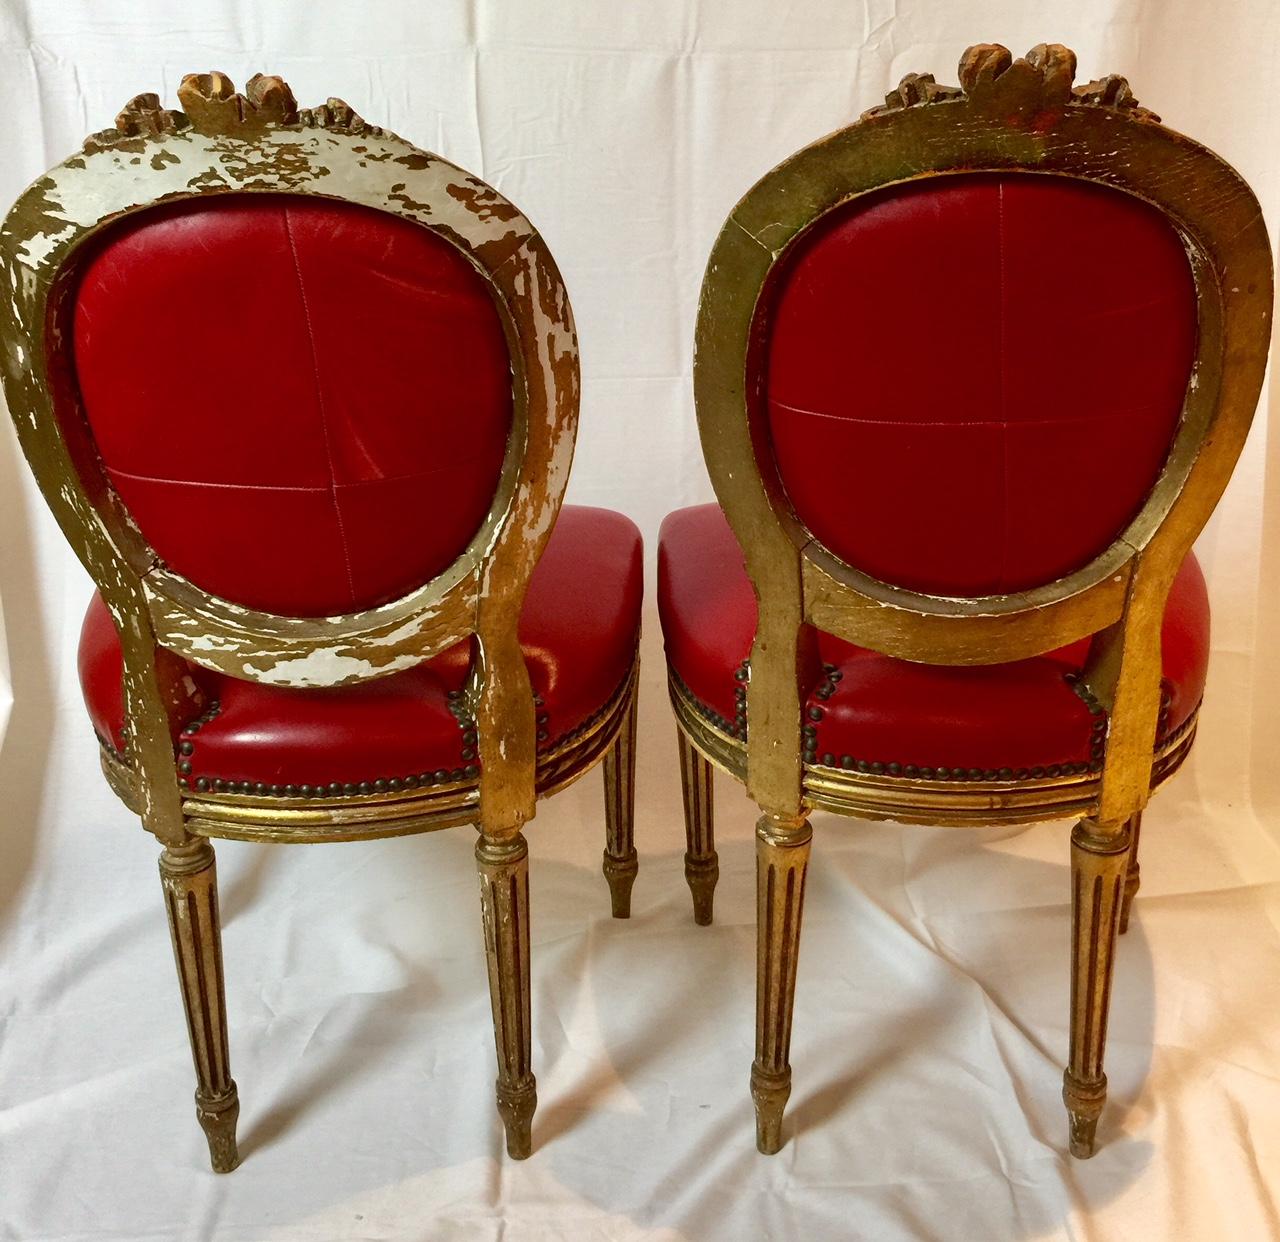 A decorative pair of French giltwood Louis XVI style side accent chairs with carved flower garland and rope detailing, cabriolet medallion or oval back, carved rosettes and fluted (canelure) legs. Red leather upholstery with brass studs, circa 19th